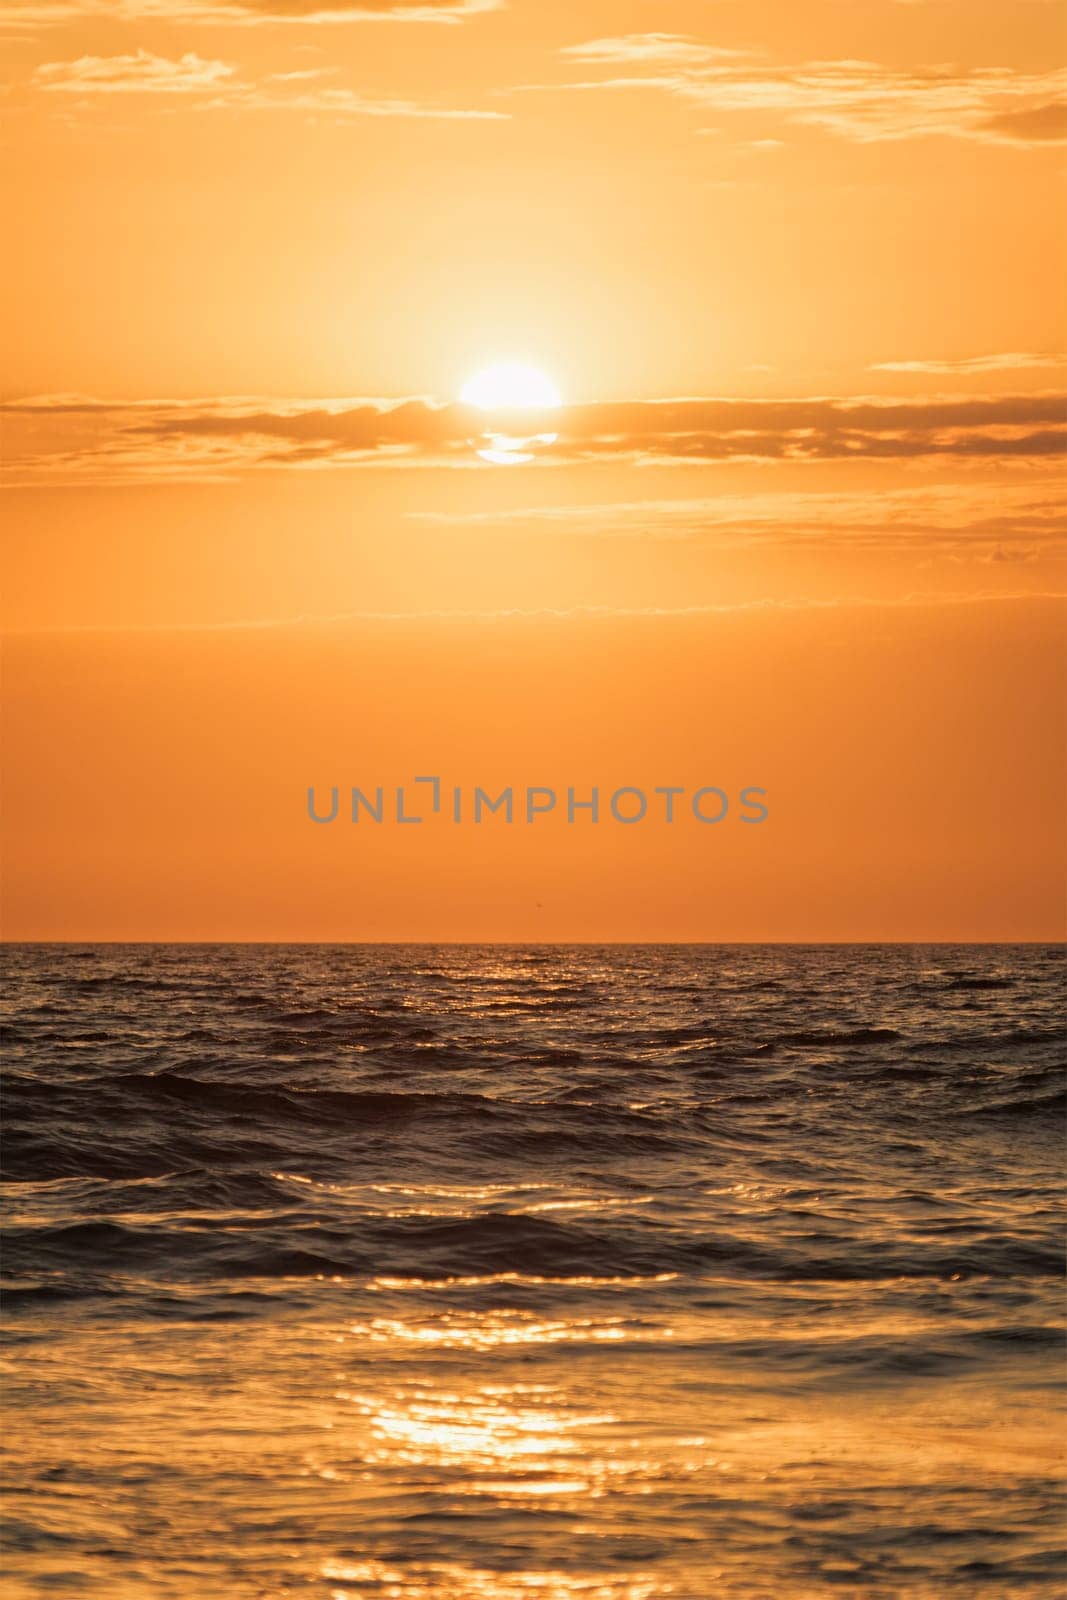 Ocean waves on sunset background by dimol